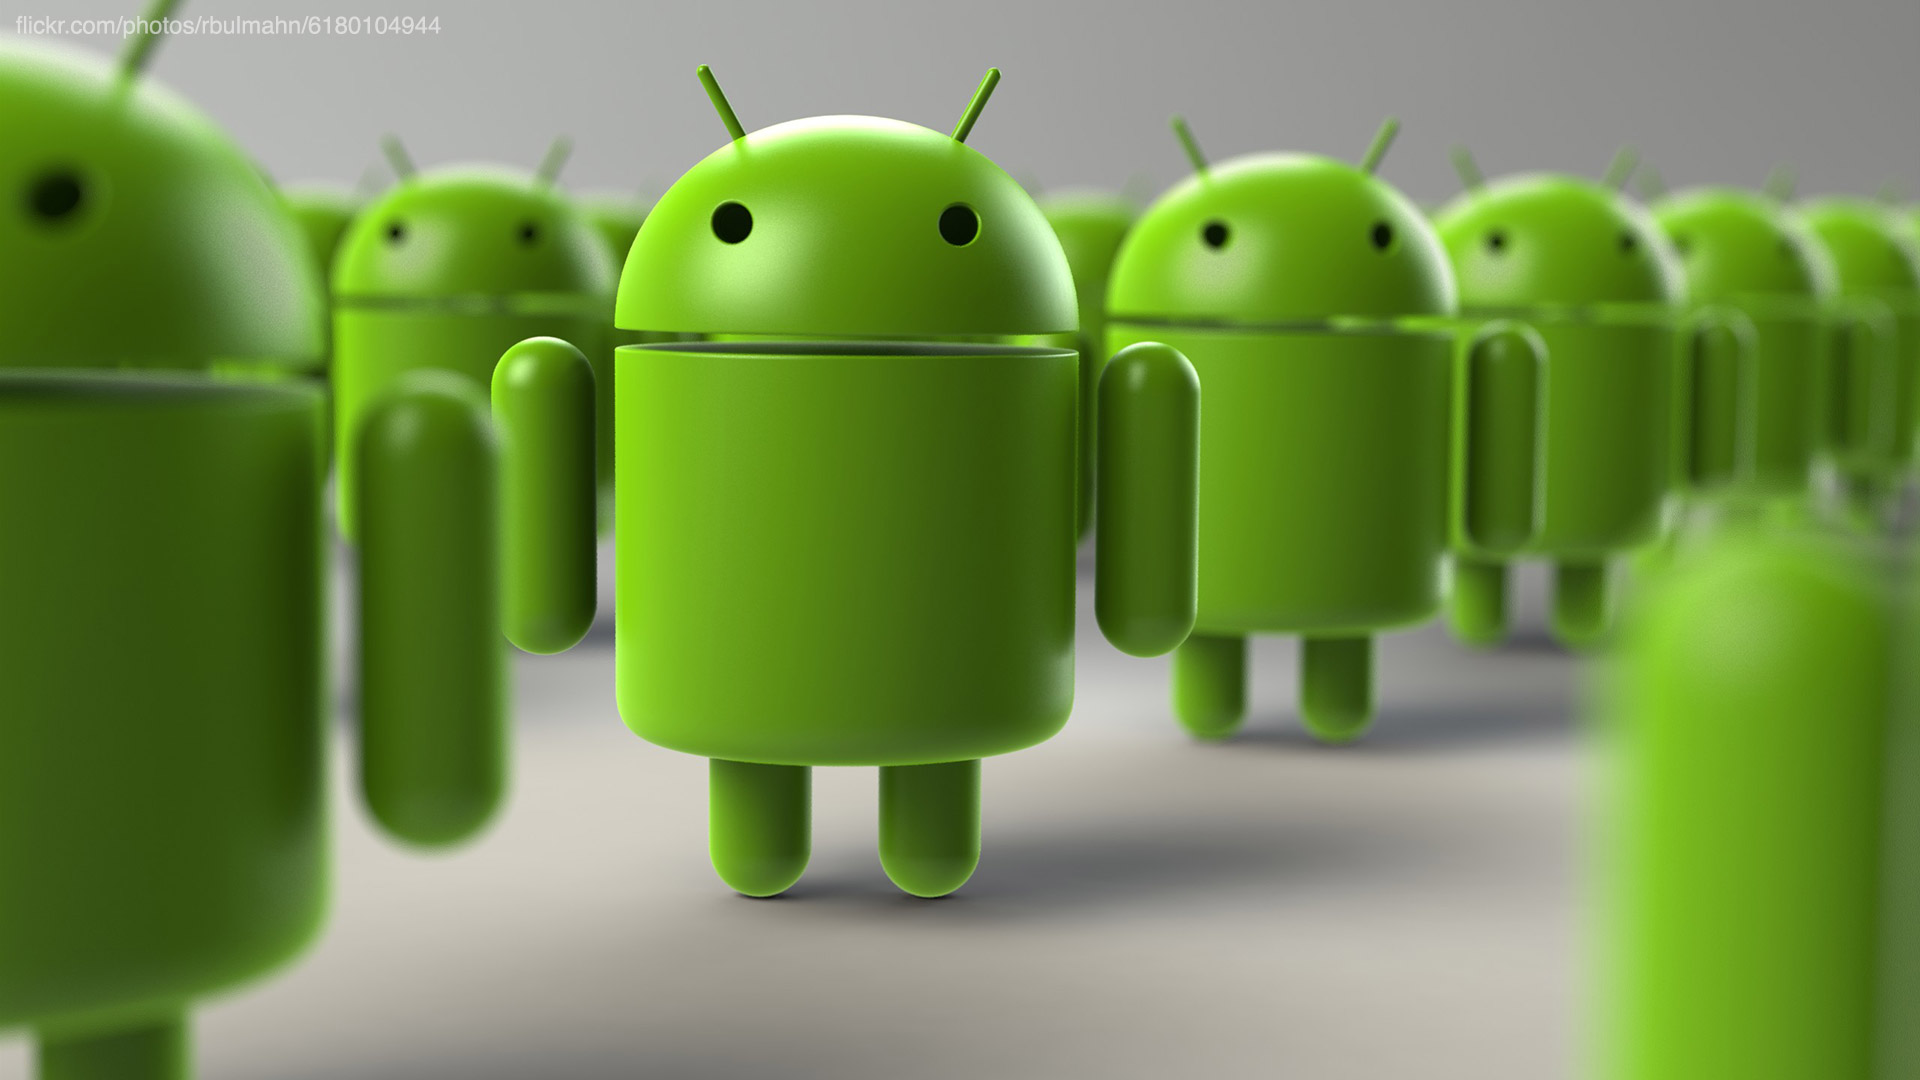 Android OSs